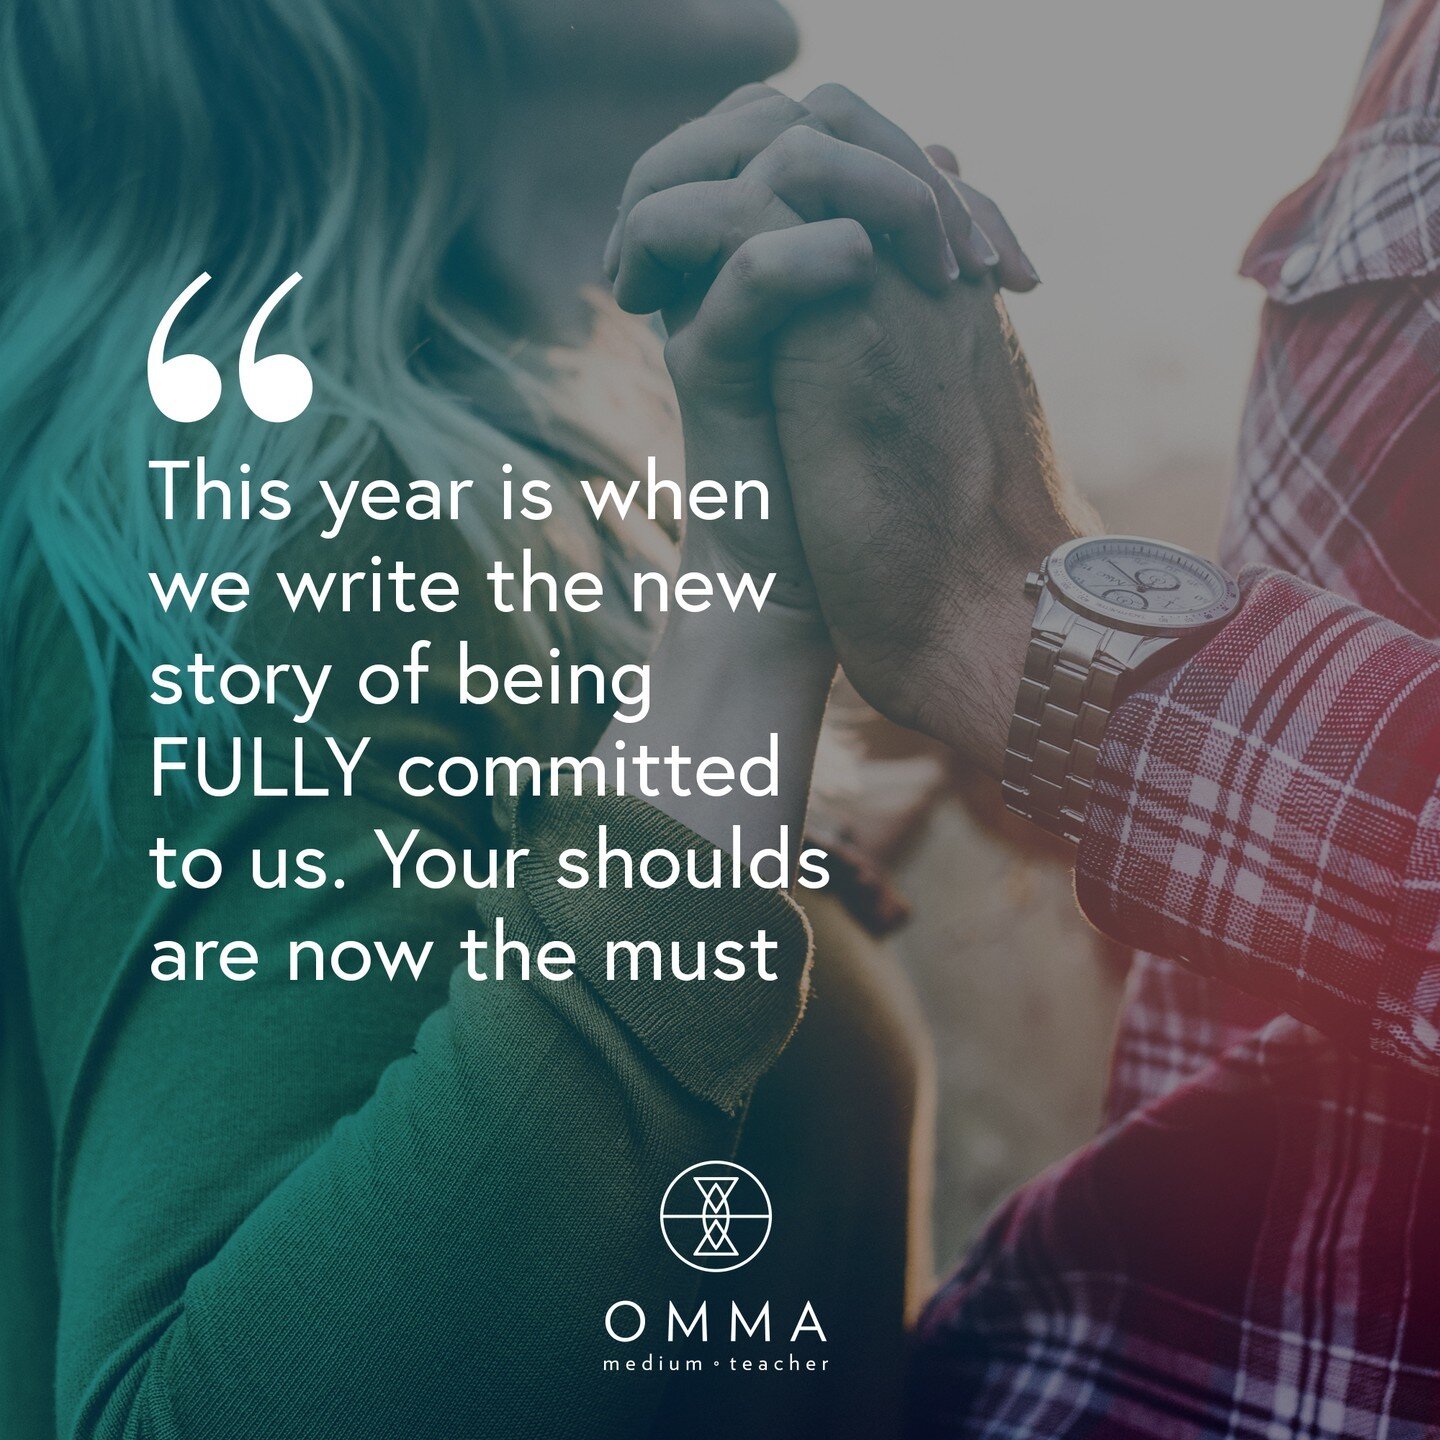 &quot;This year is when we write the new story of being FULLY committed to us. Your shoulds are now the must.&quot;⁣
⁣
⁣
#enlightenment #theomma #psychic #medium #healer #psychicmedium #spiritualcoach #intuition #afterlife #awakening #consciousness #